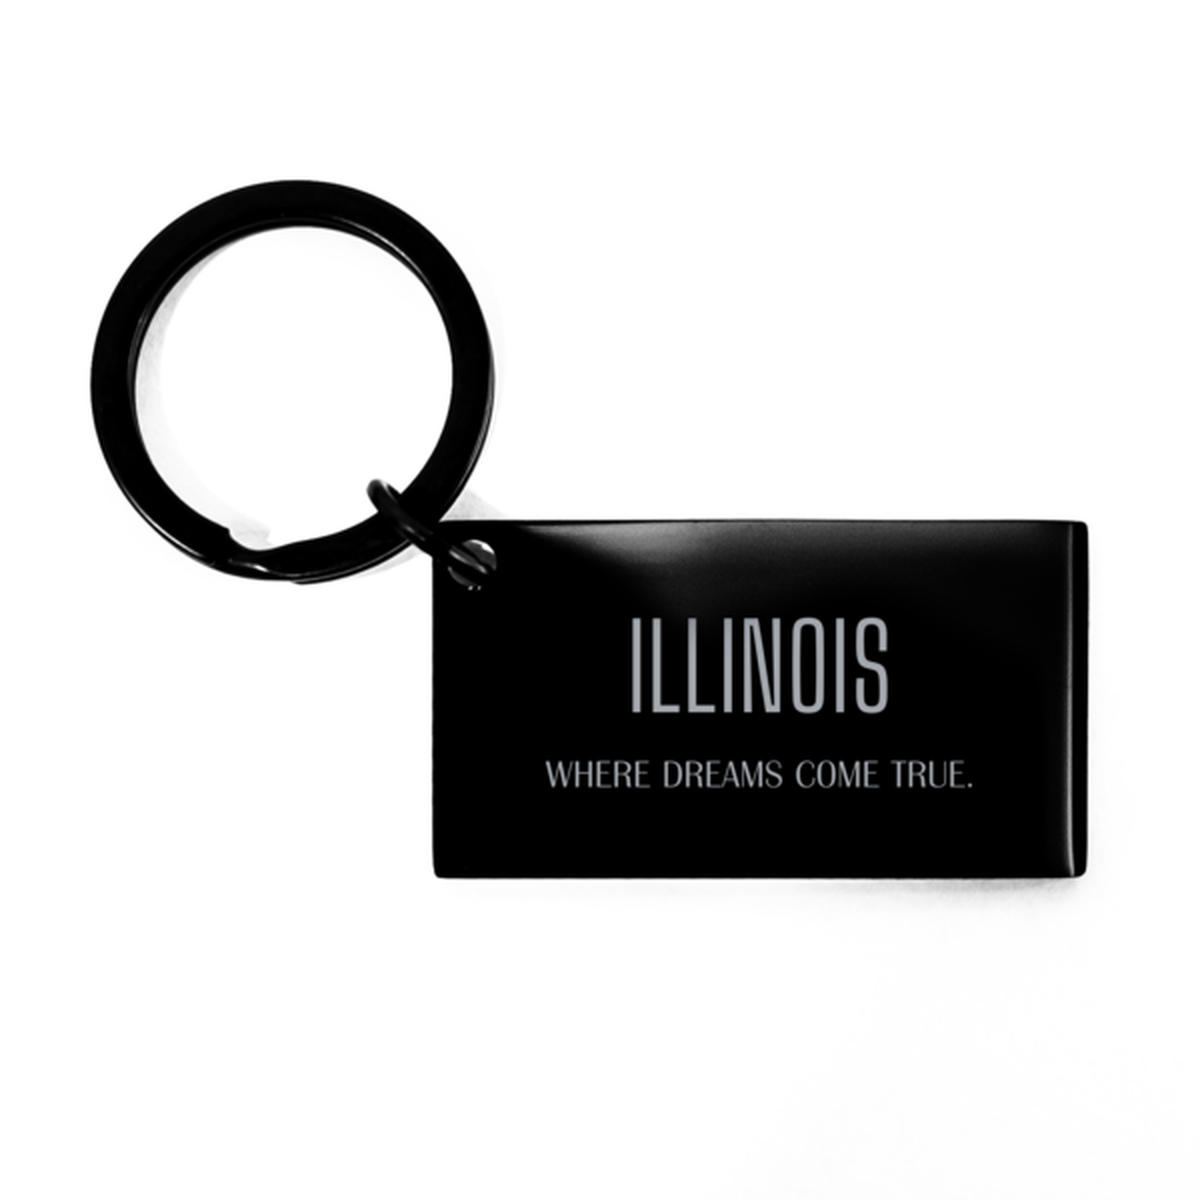 Love Illinois State Keychain, Illinois Where dreams come true, Birthday Inspirational Gifts For Illinois Men, Women, Friends